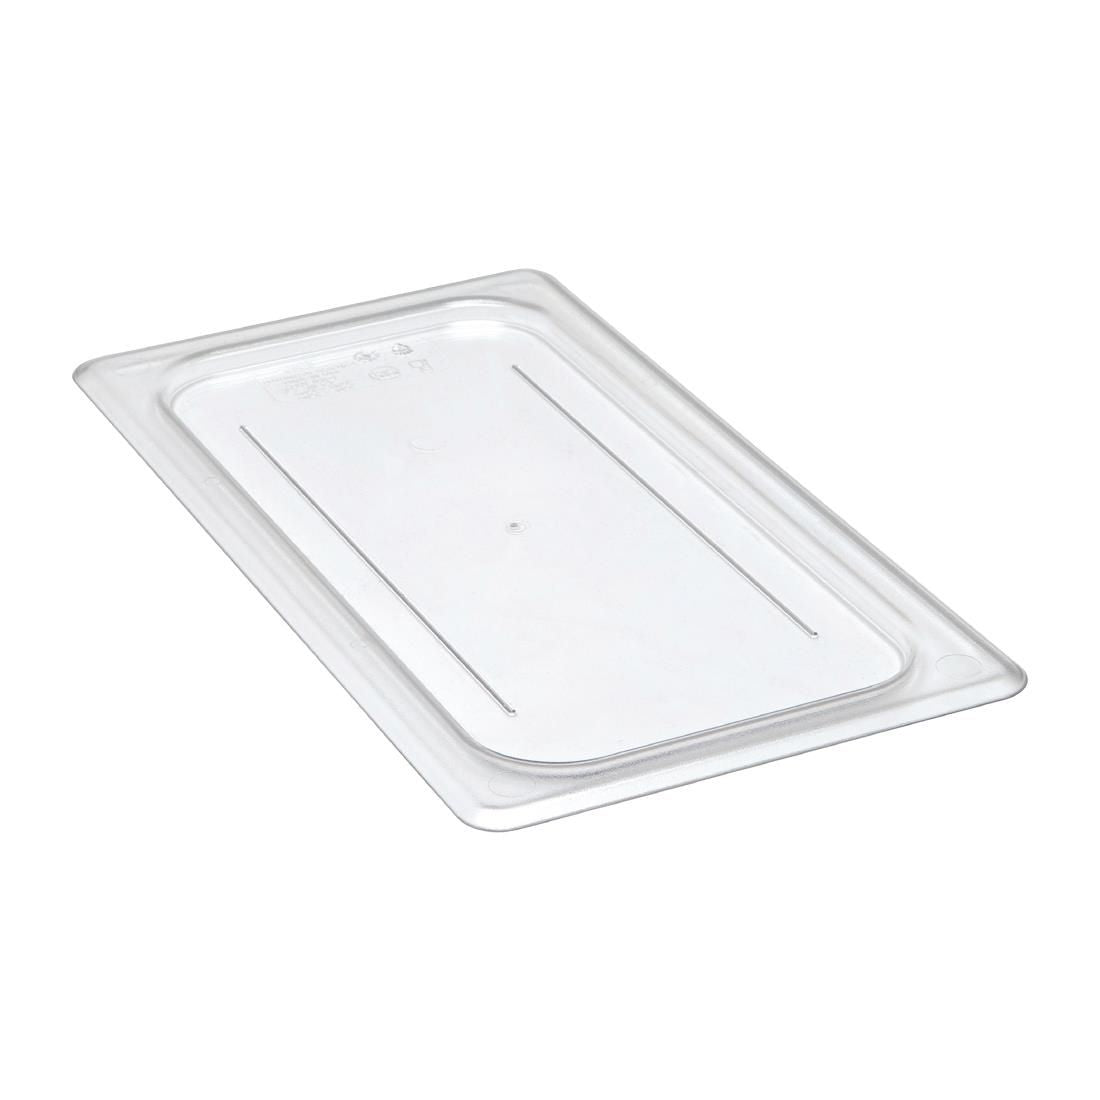 DC664 Cambro Clear Polycarbonate 1/3 Gastronorm Lid JD Catering Equipment Solutions Ltd